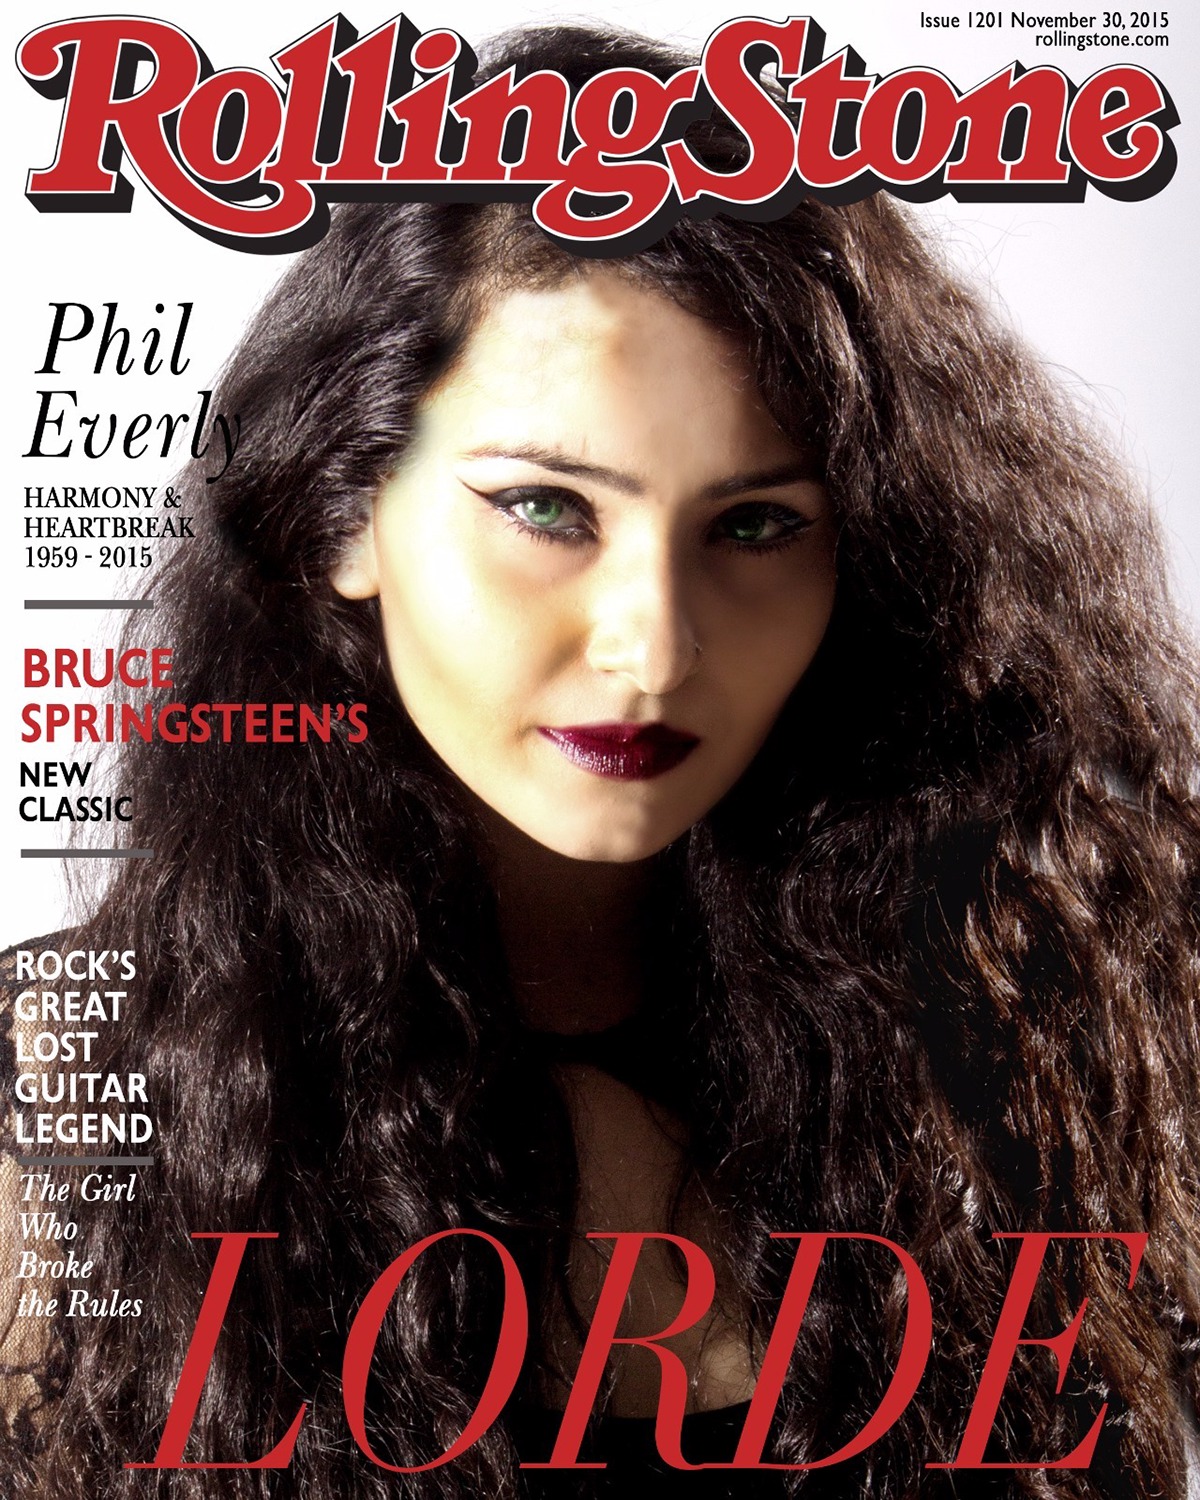 Lorde Steve Jobs styling  Magazine Cover